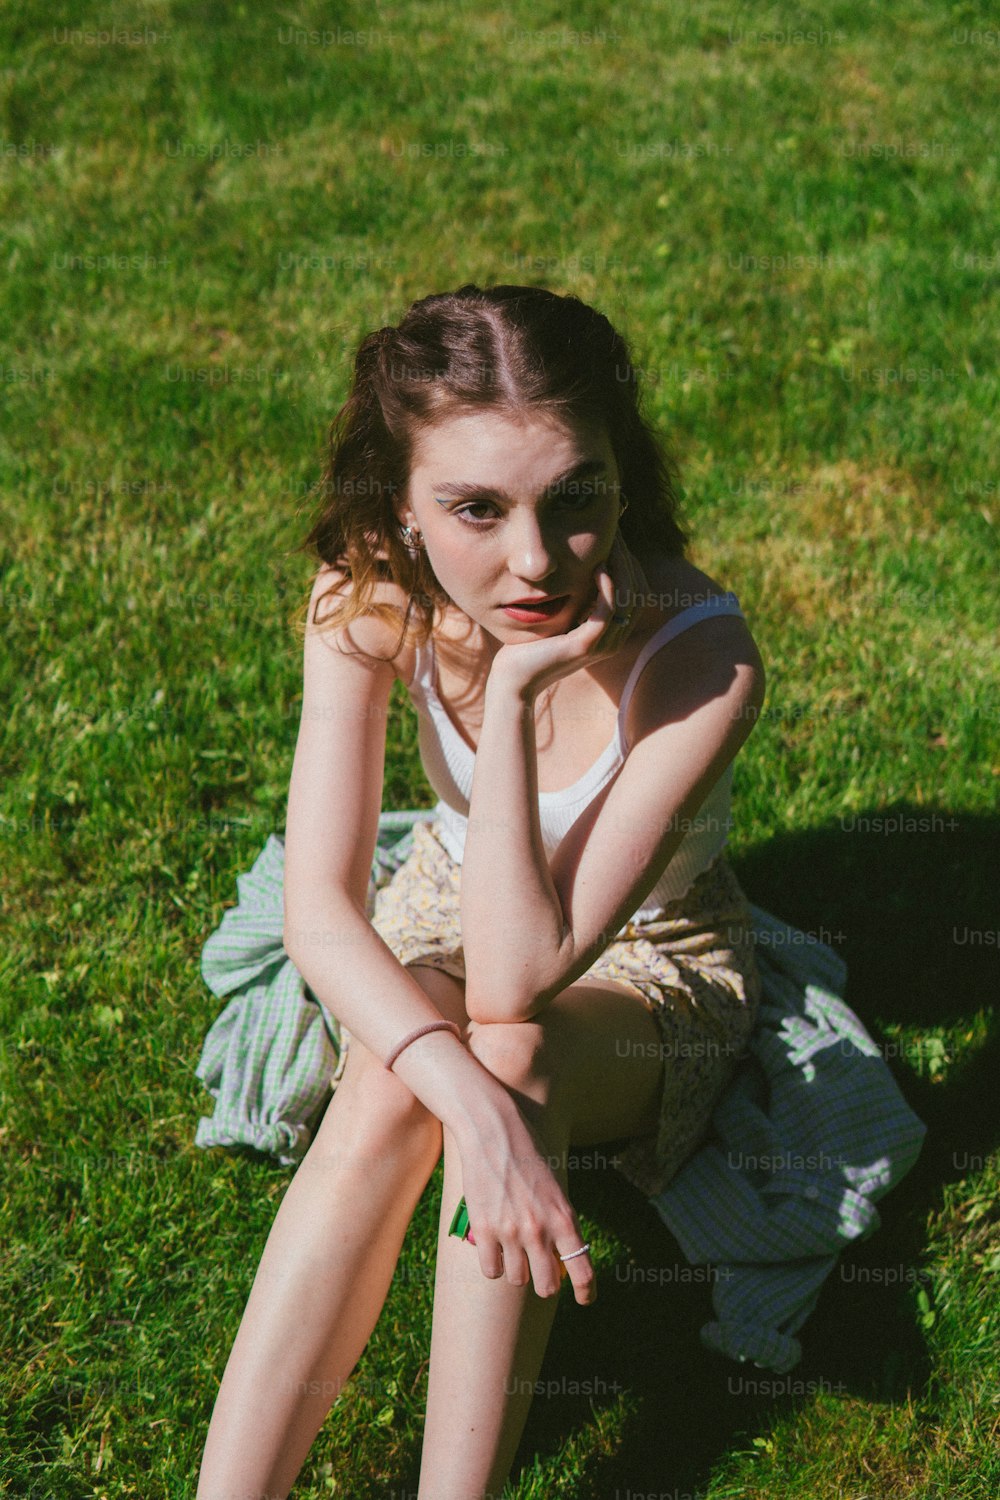 a young girl sitting on the grass with her hand on her chin